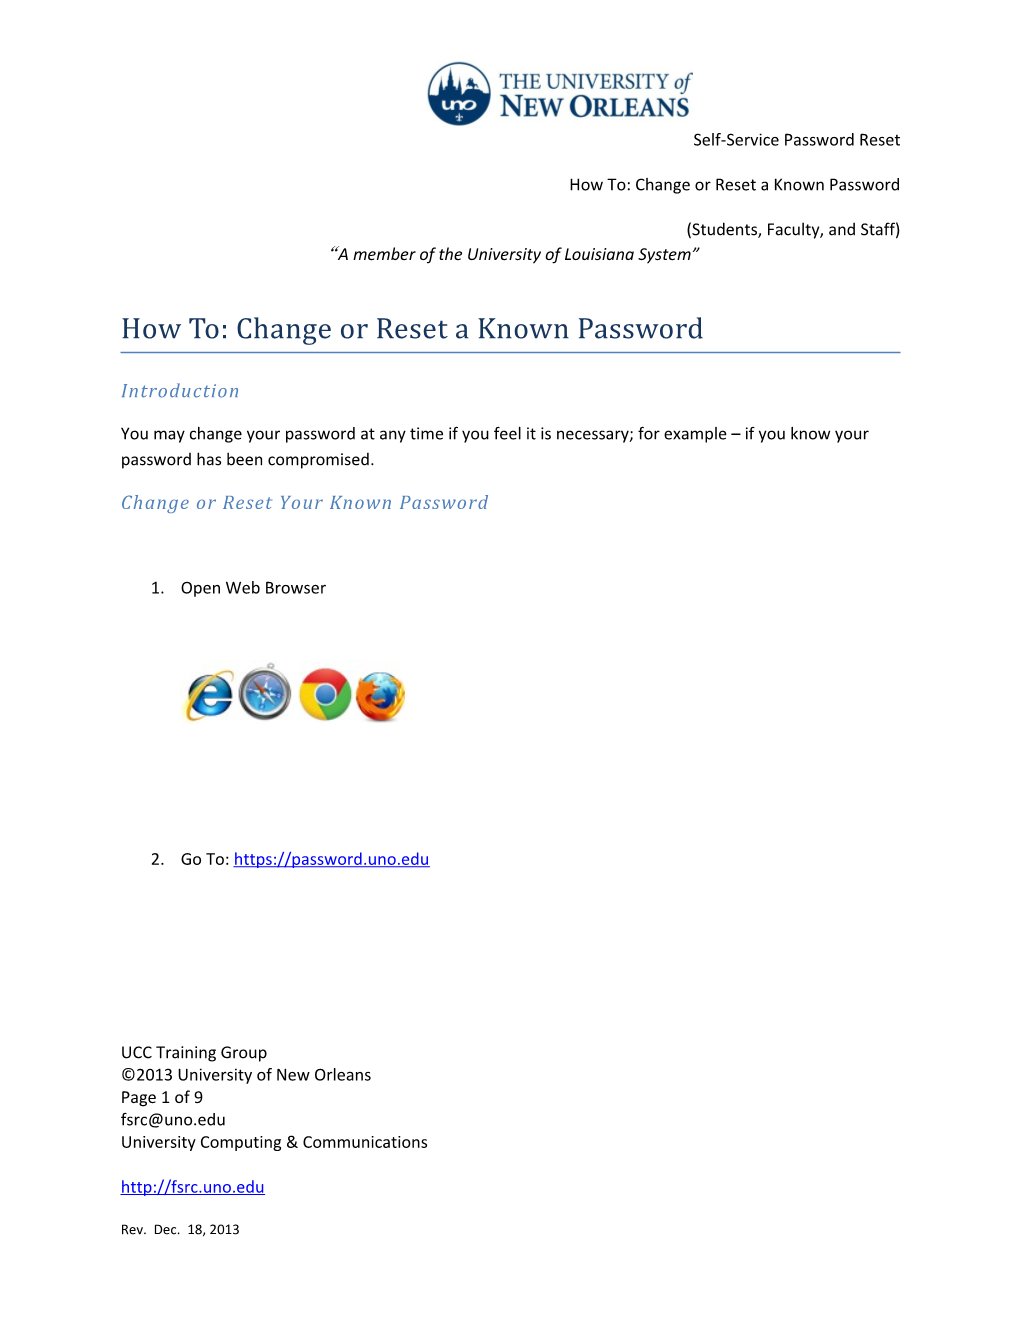 How To-Change Or Reset Known Password-SFS